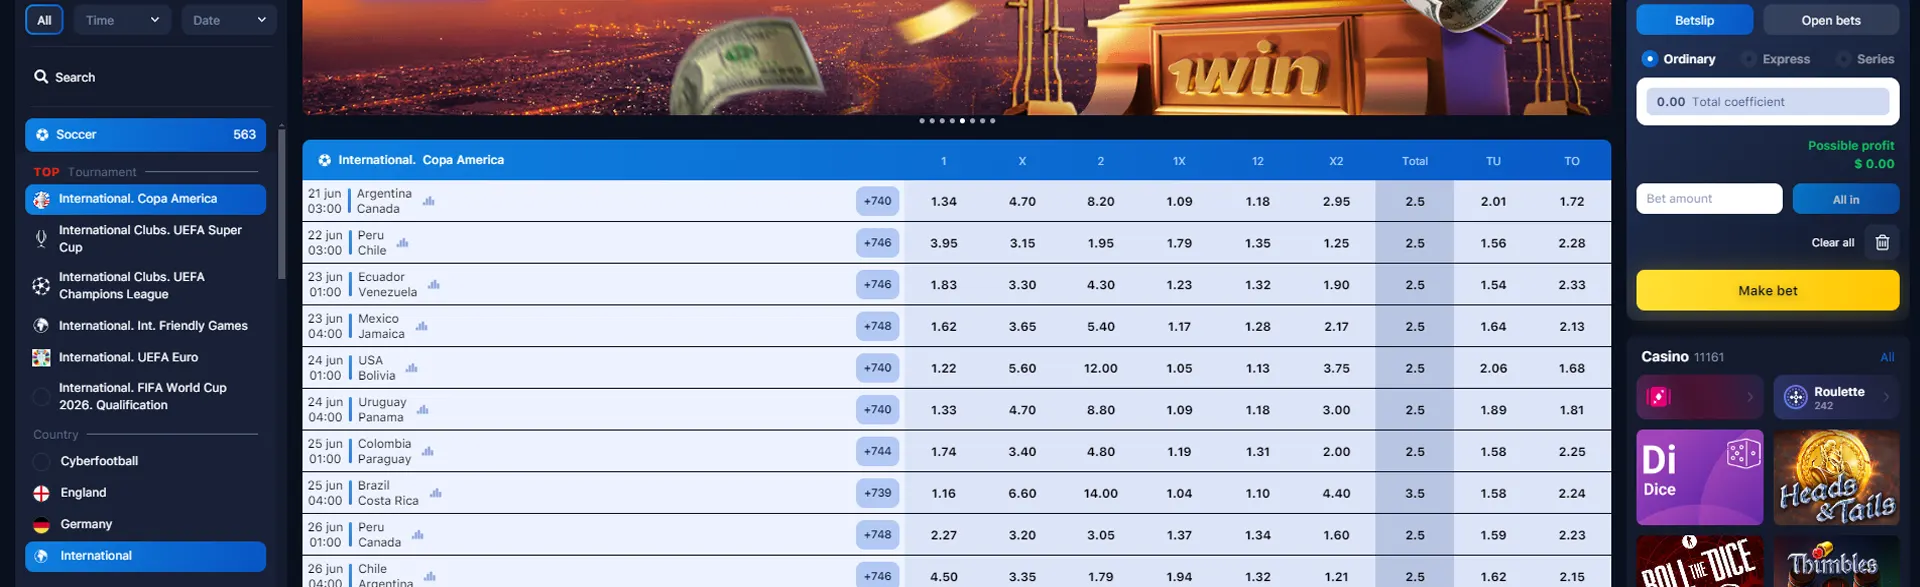 The best bonuses for different sports on the betting site 1win.